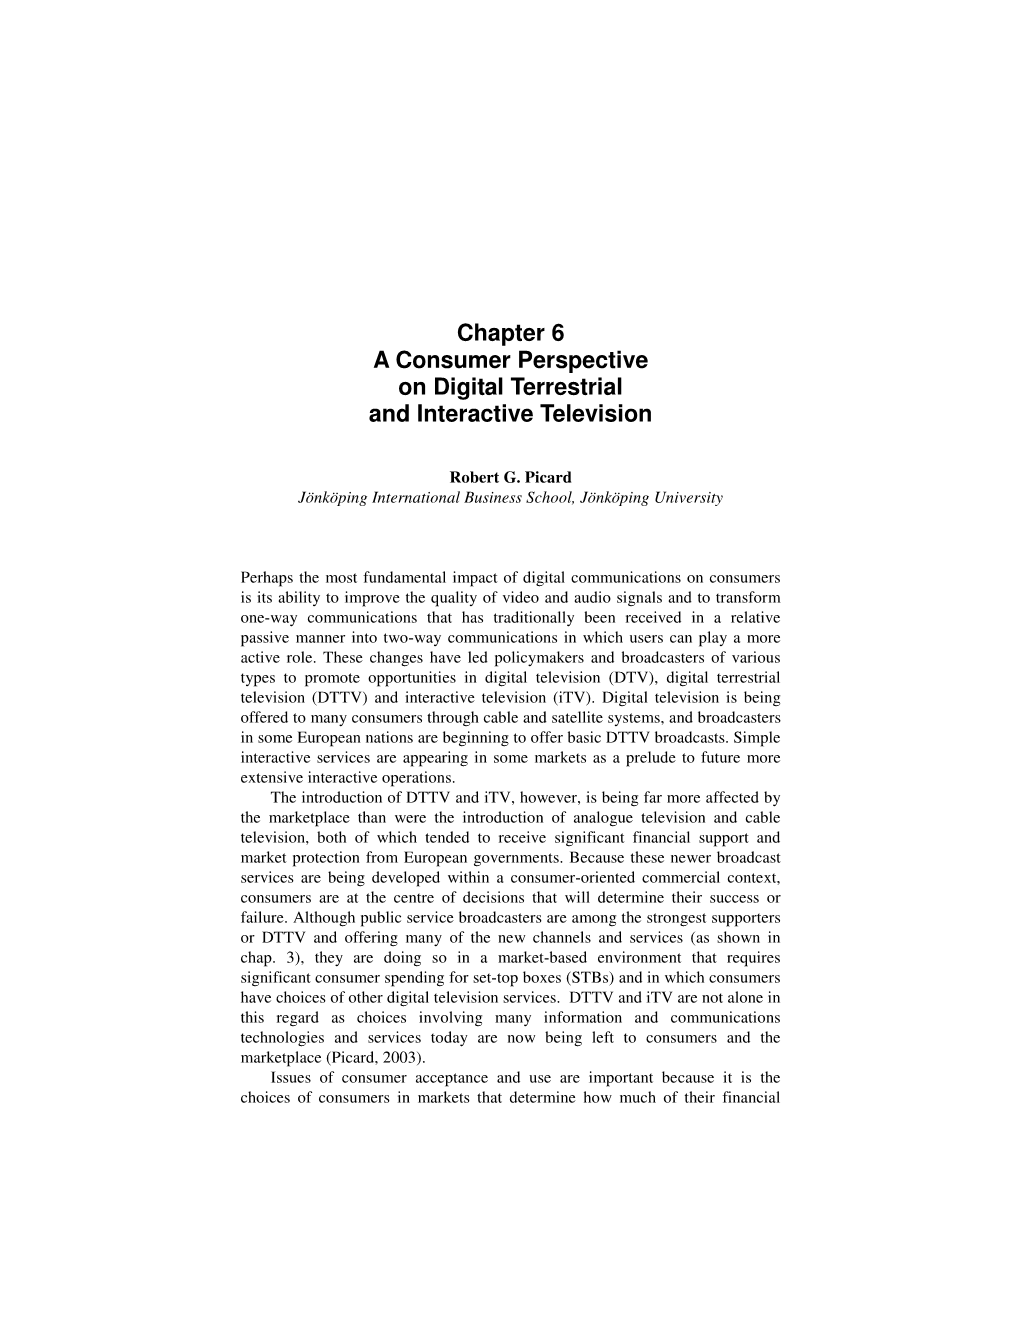 Chapter 6 a Consumer Perspective on Digital Terrestrial and Interactive Television